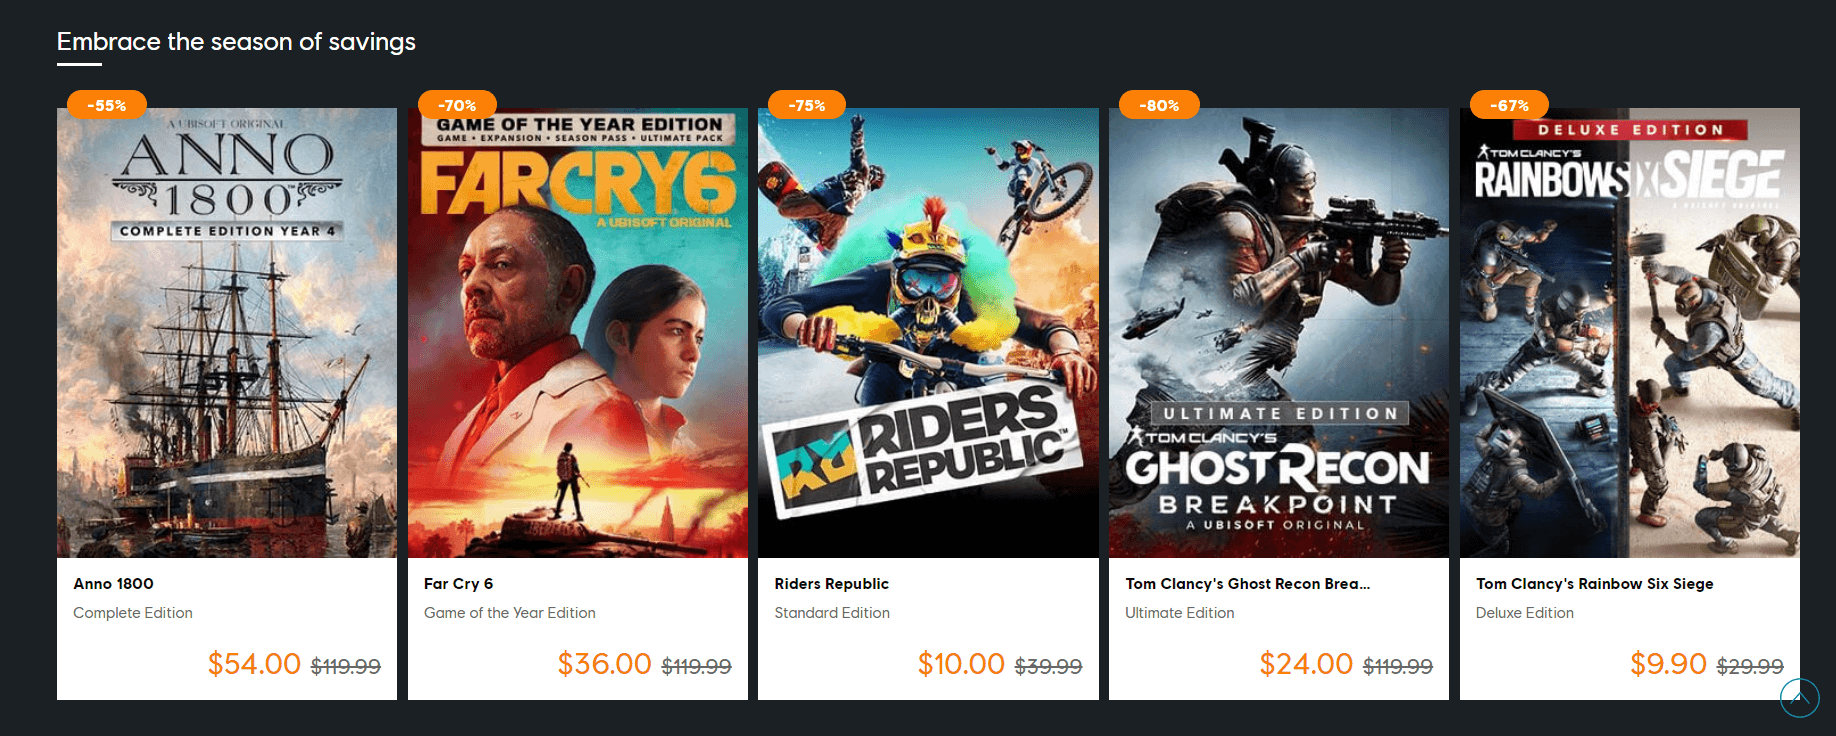 Some highlights from Ubisoft's fall sale